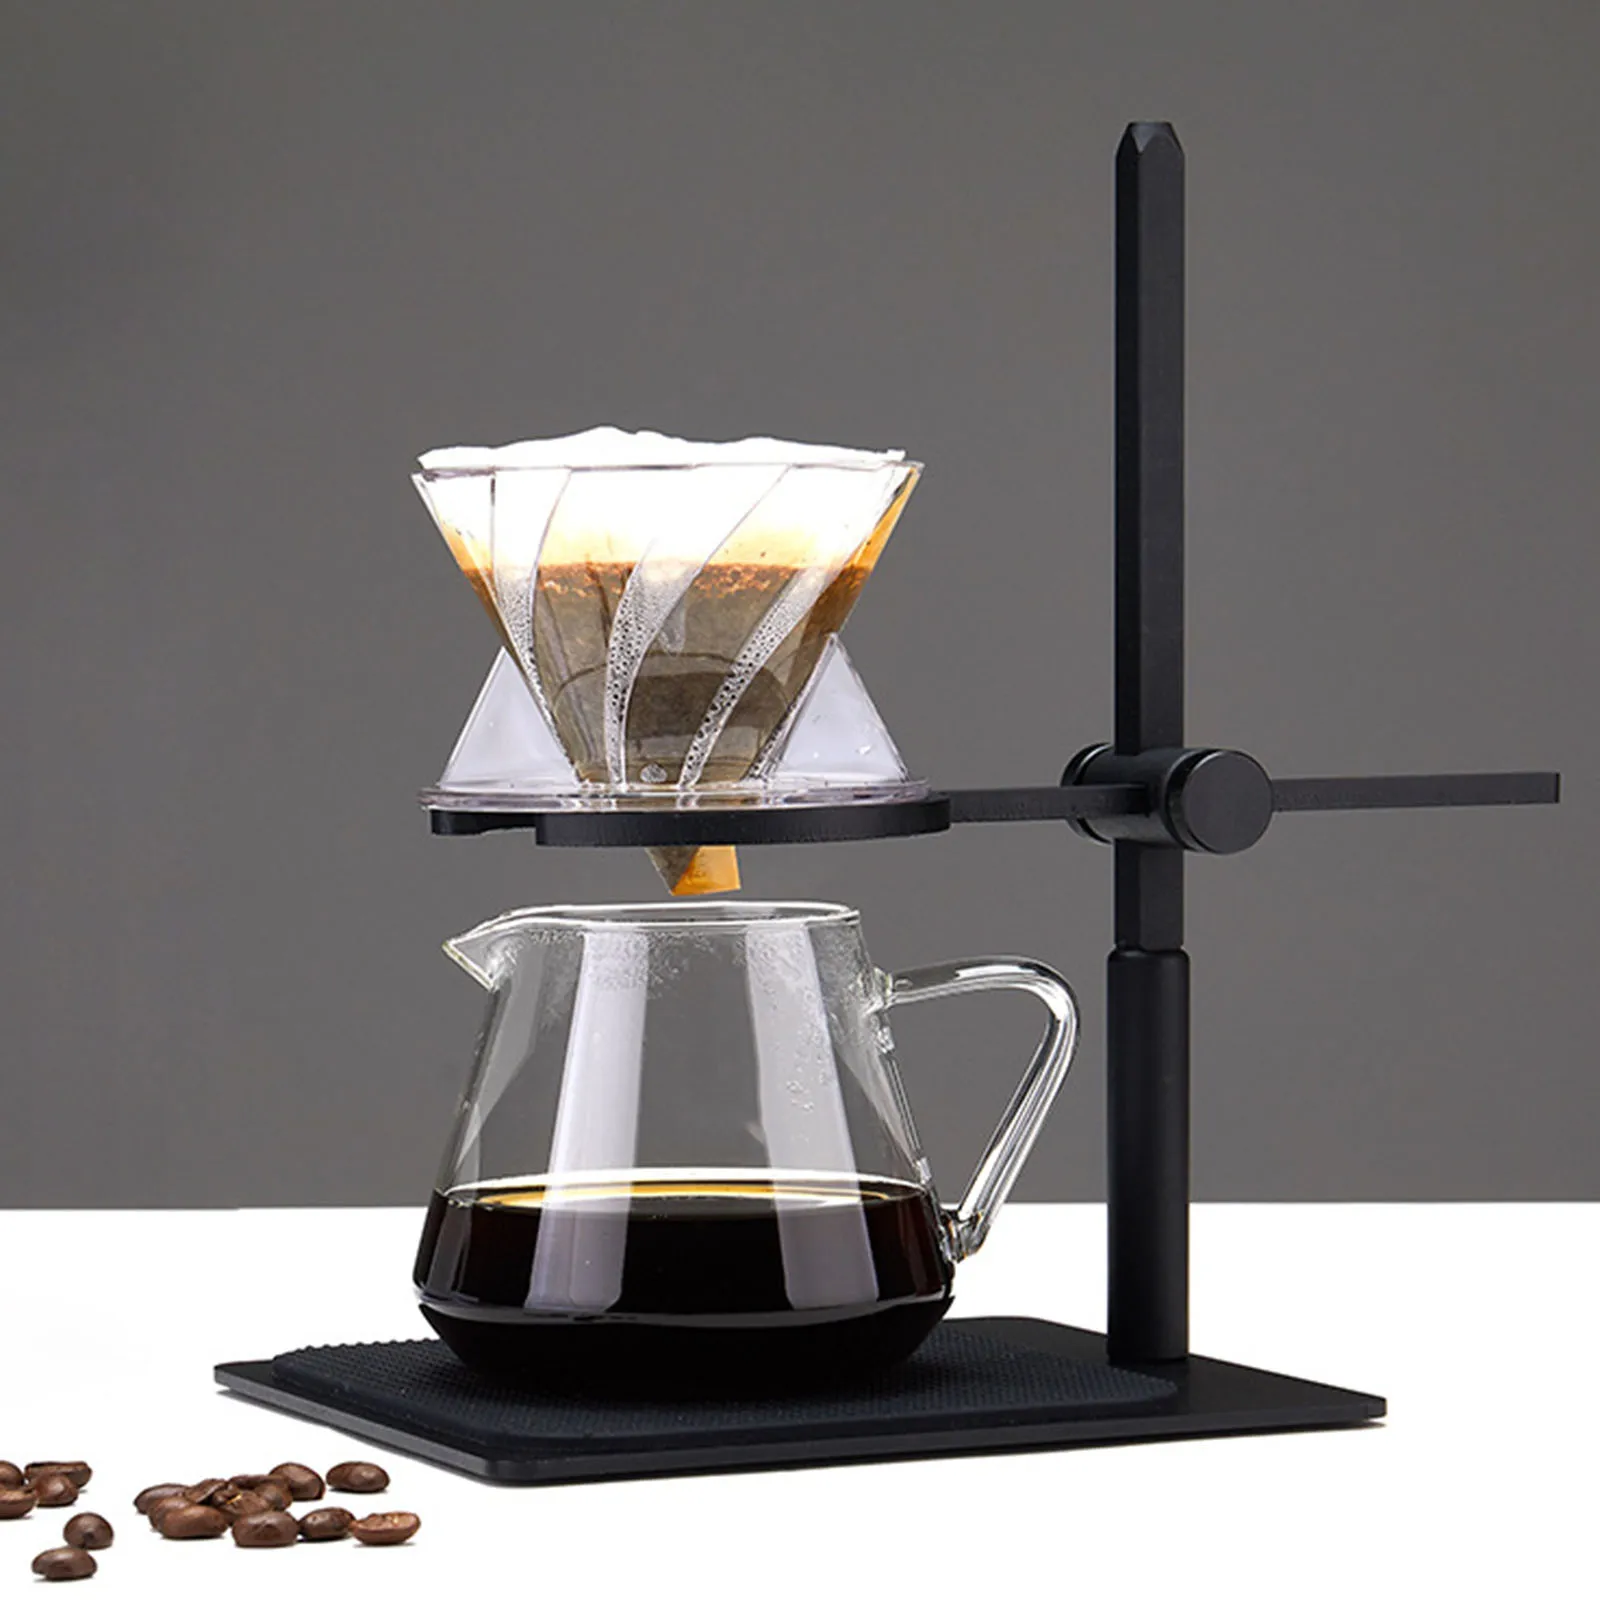 Coffee Dripper Stand Coffee Filters Brewing Holder Pour Over Coffee Maker Stand Silicone Base for Home Kitchen Cafe